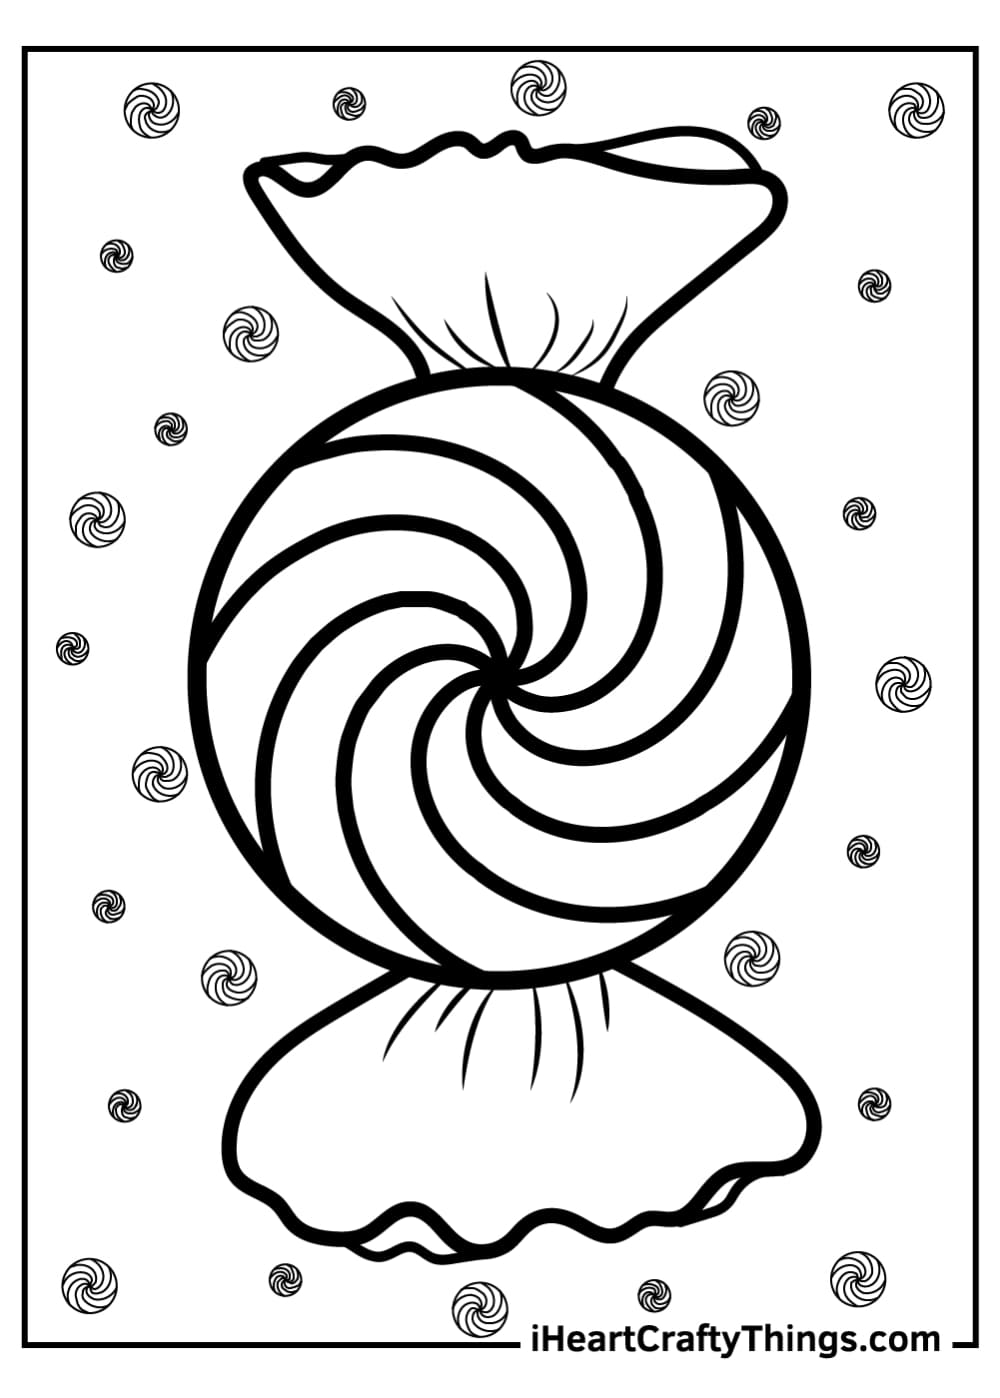 peppermint-candy-coloring coloring page - Download, Print or Color ...